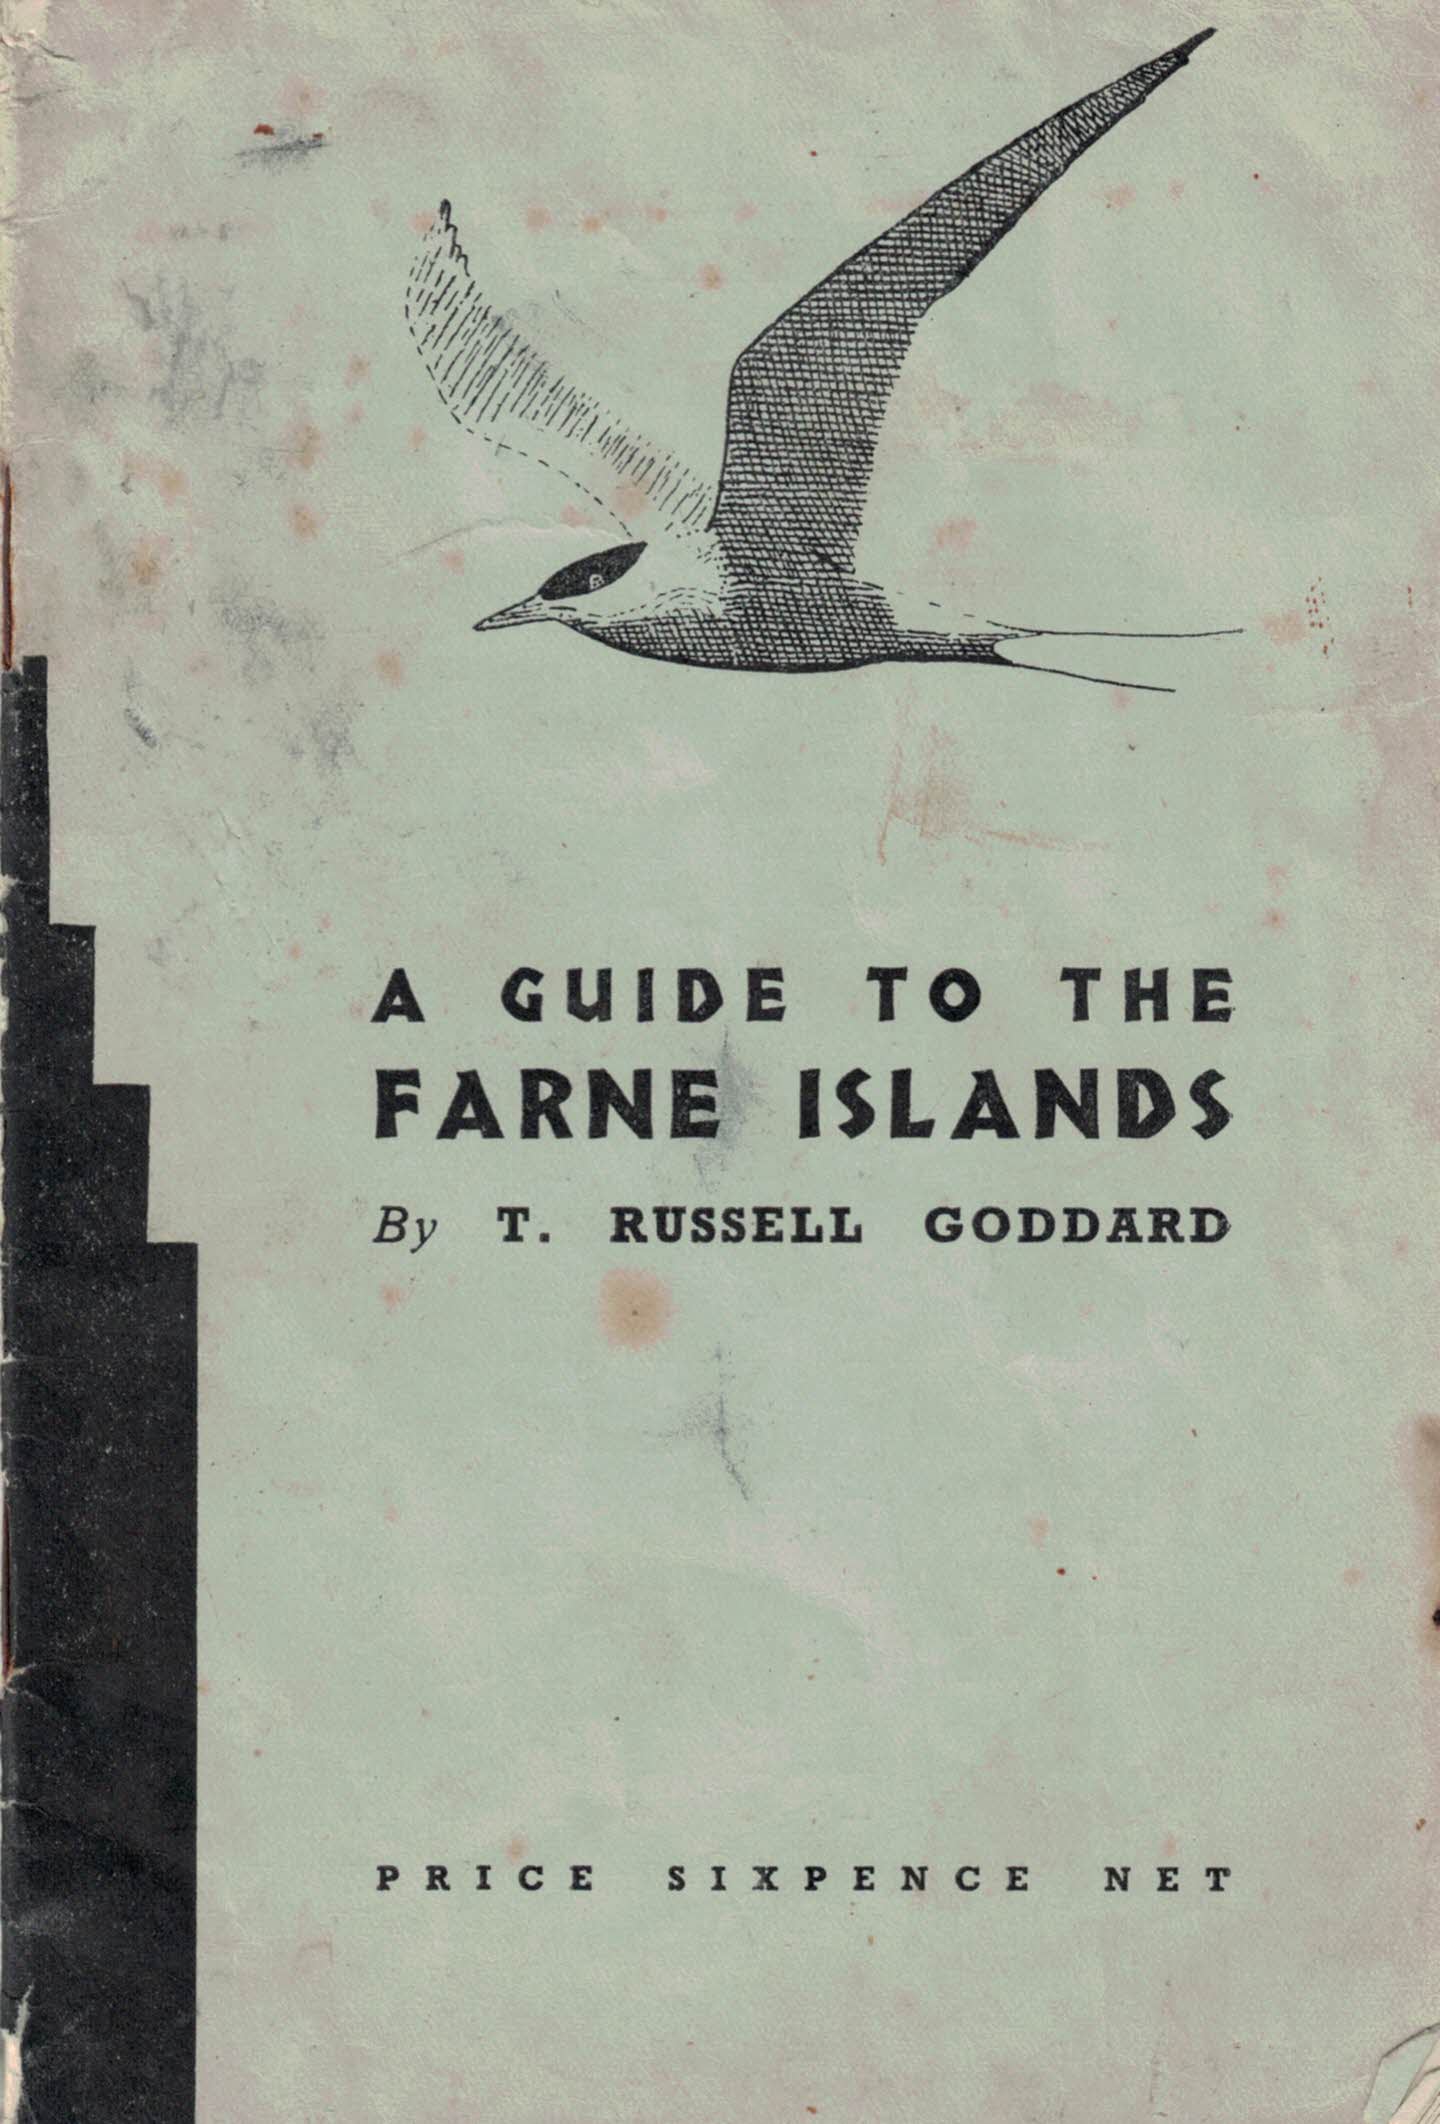 A Guide to the Farne Islands